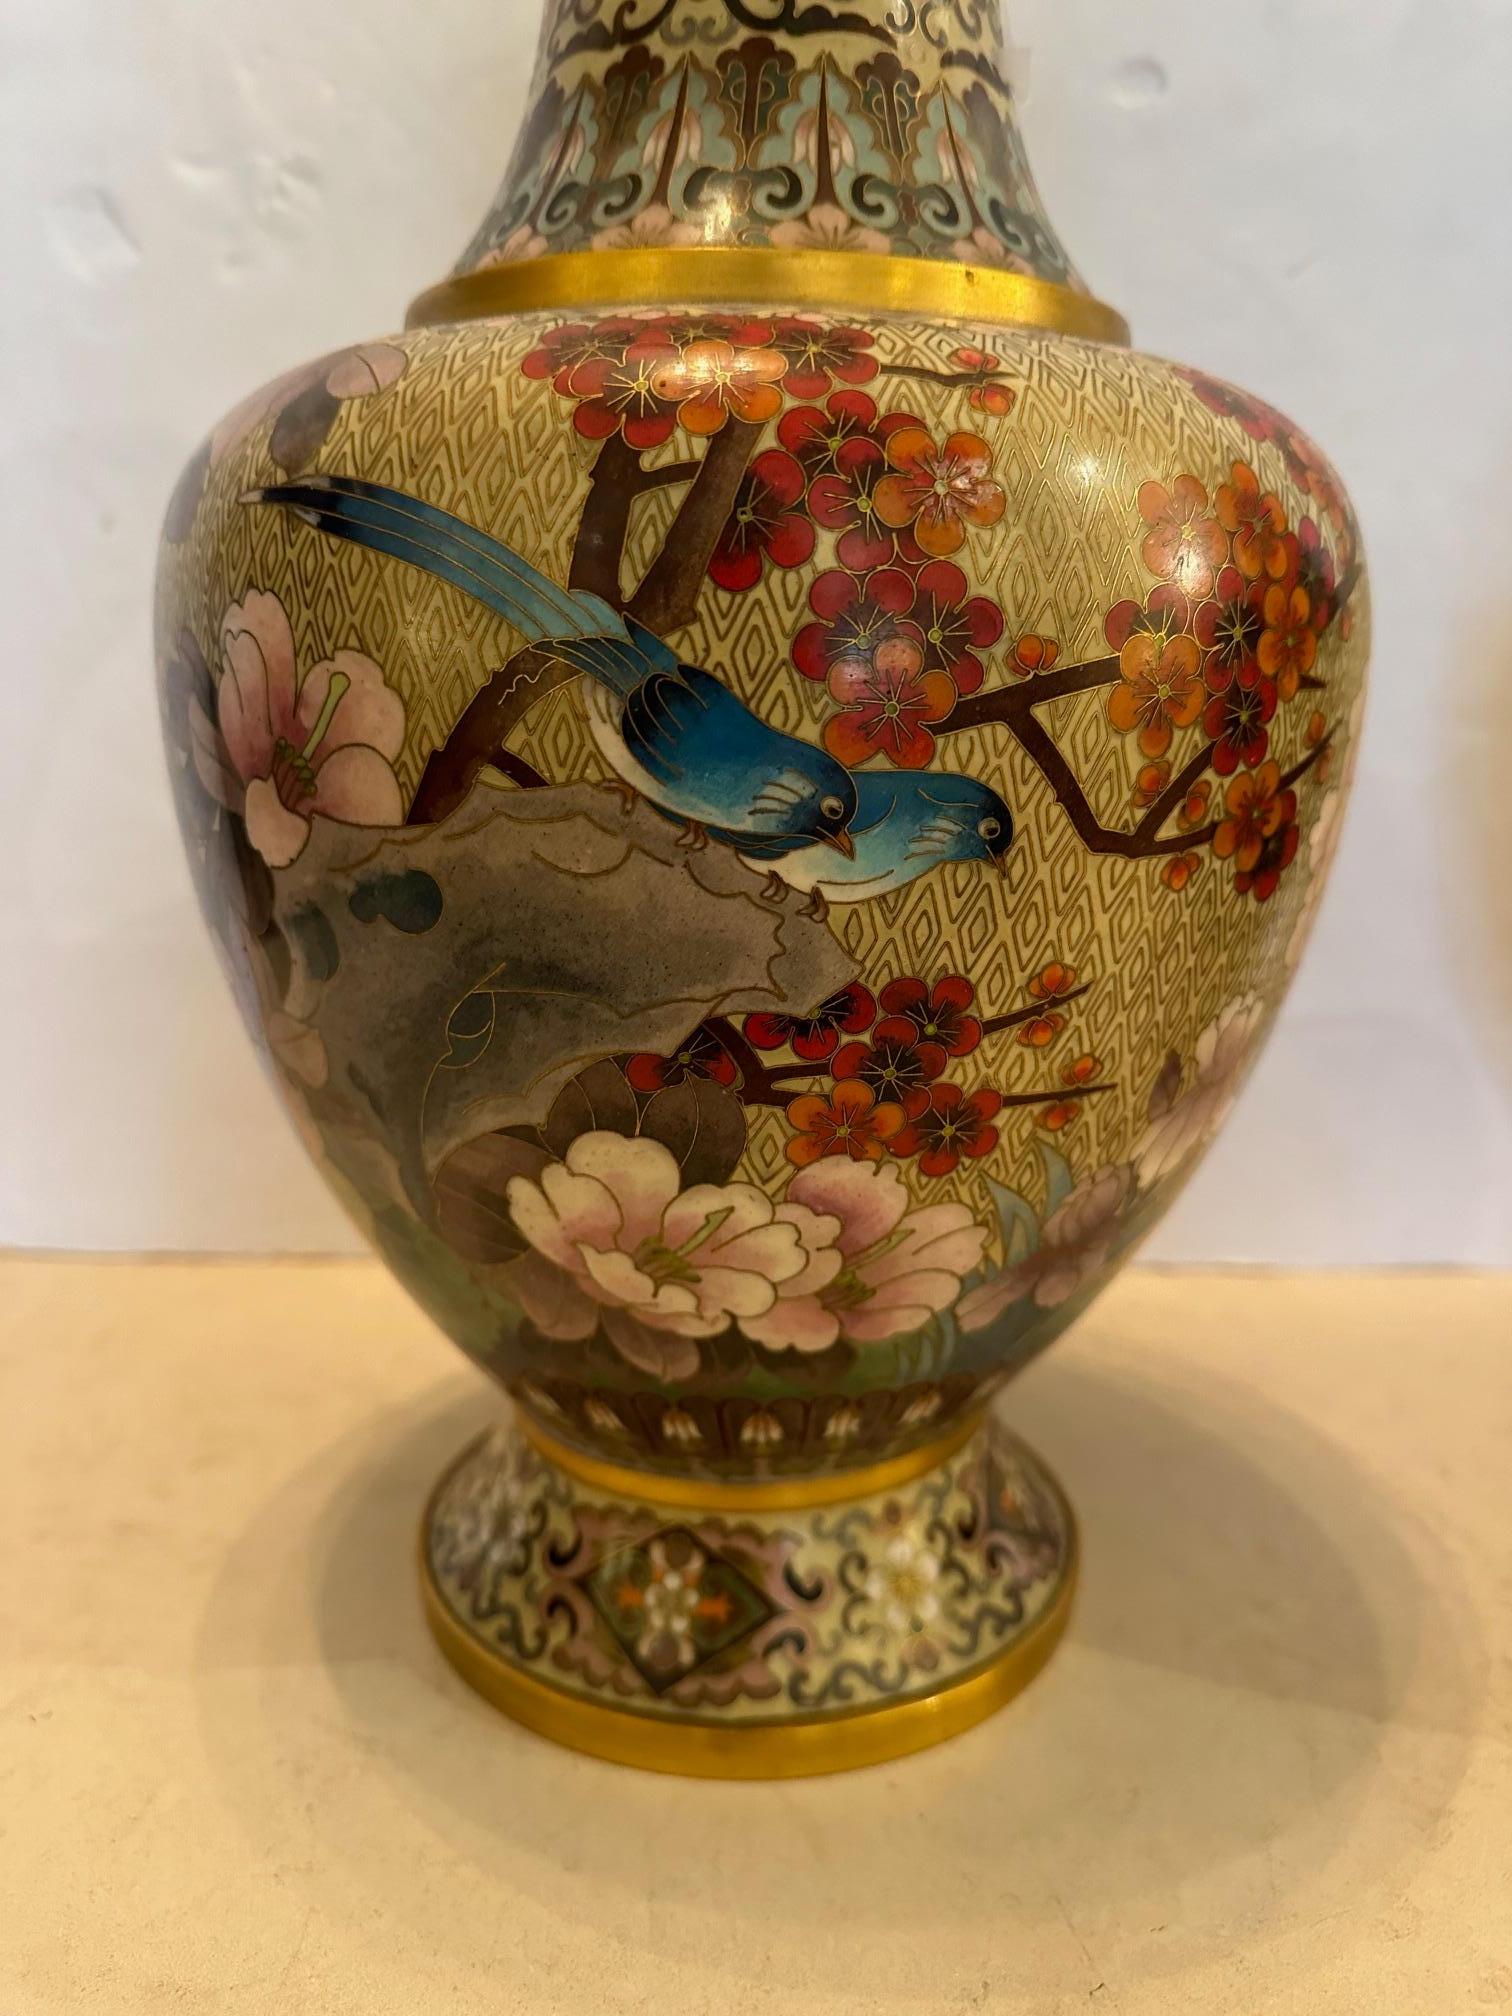 Pair of Exquisite Chinese Gilded Enamel on Bronze Cloissonne Vases For Sale 4